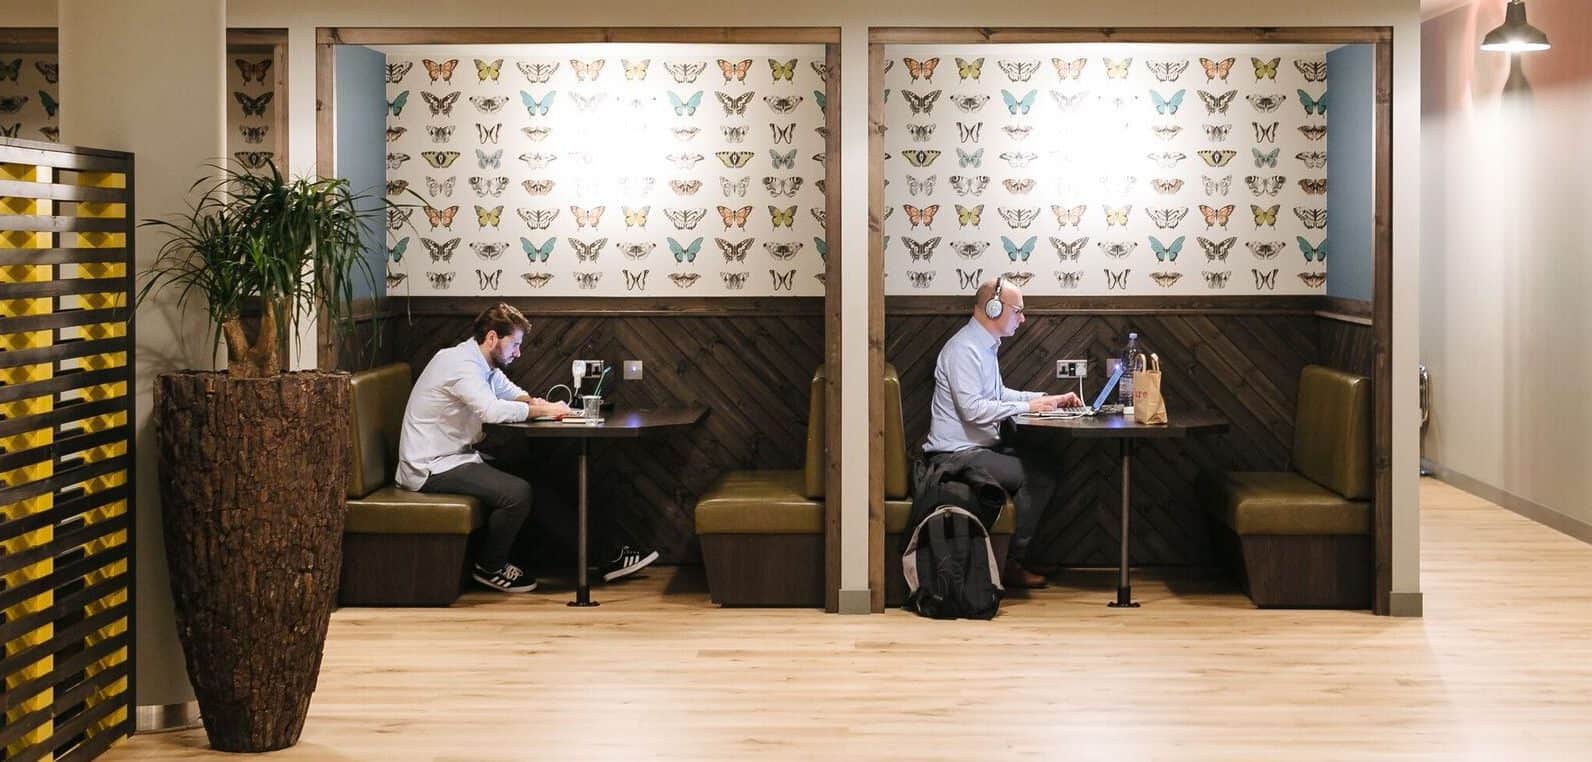 At companies like WeWork you can choose to either work alone or collaborate.